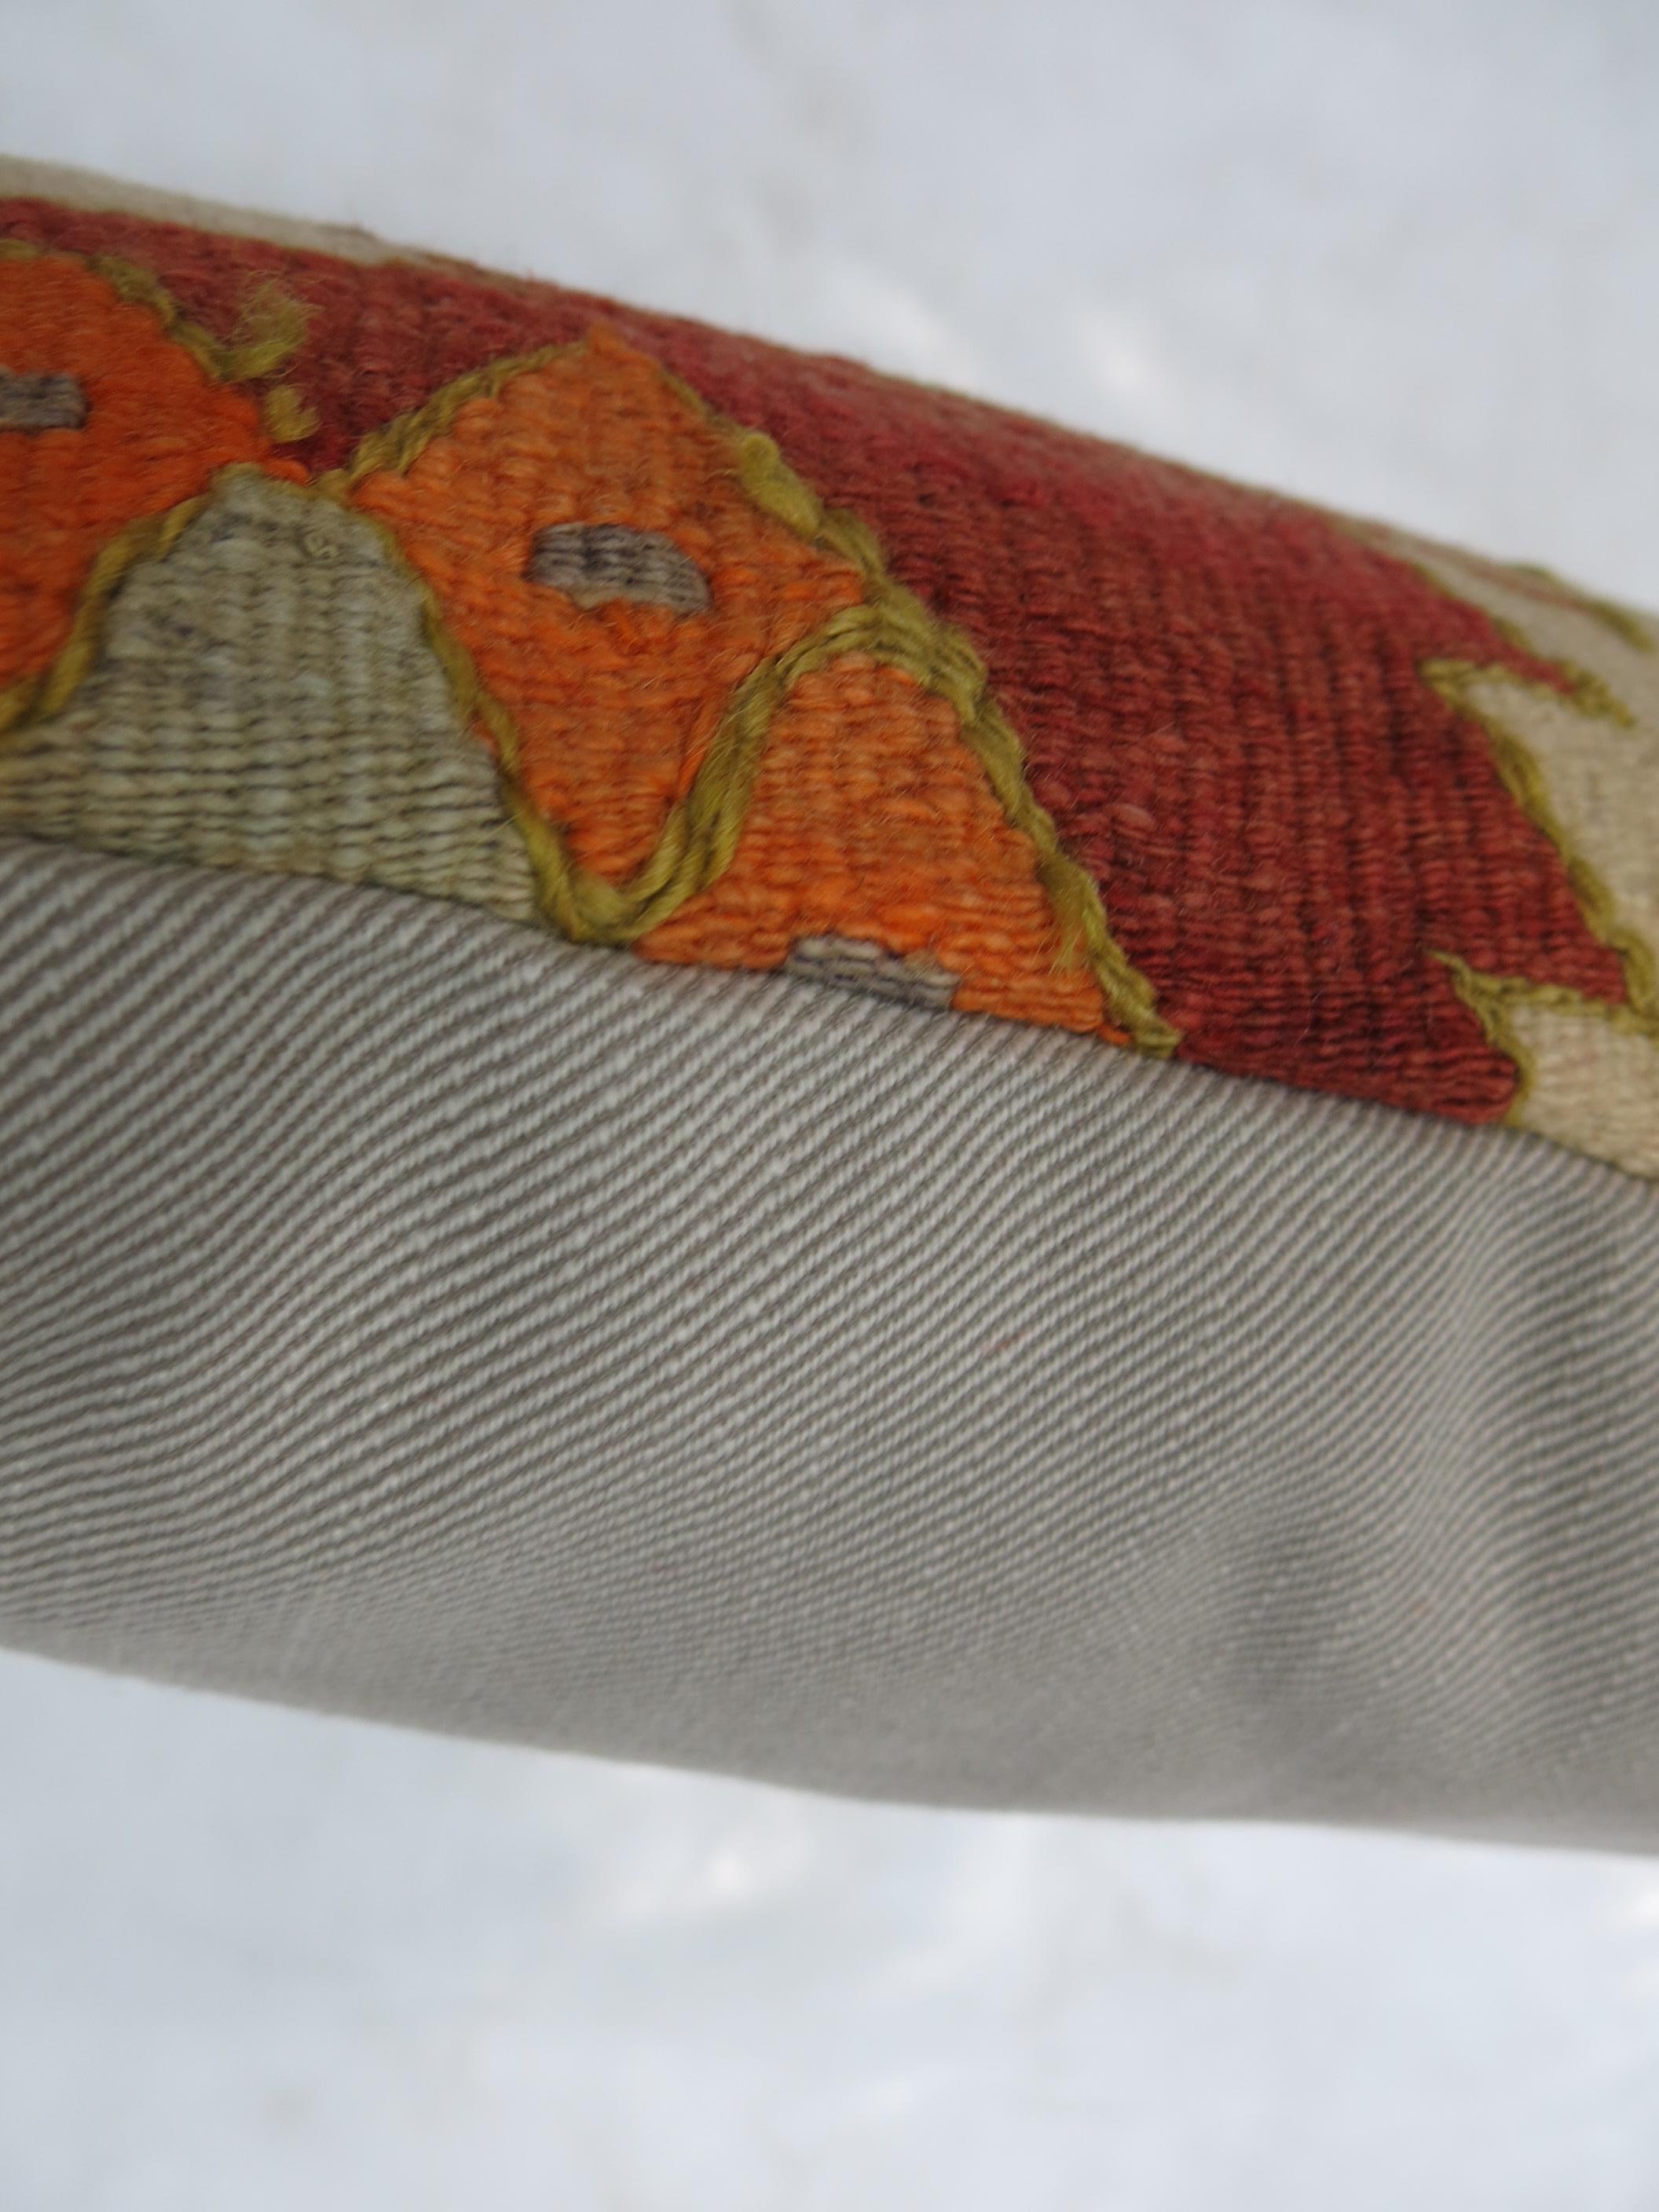 Vintage Turkish Kilim Pillow In Excellent Condition For Sale In New York, NY